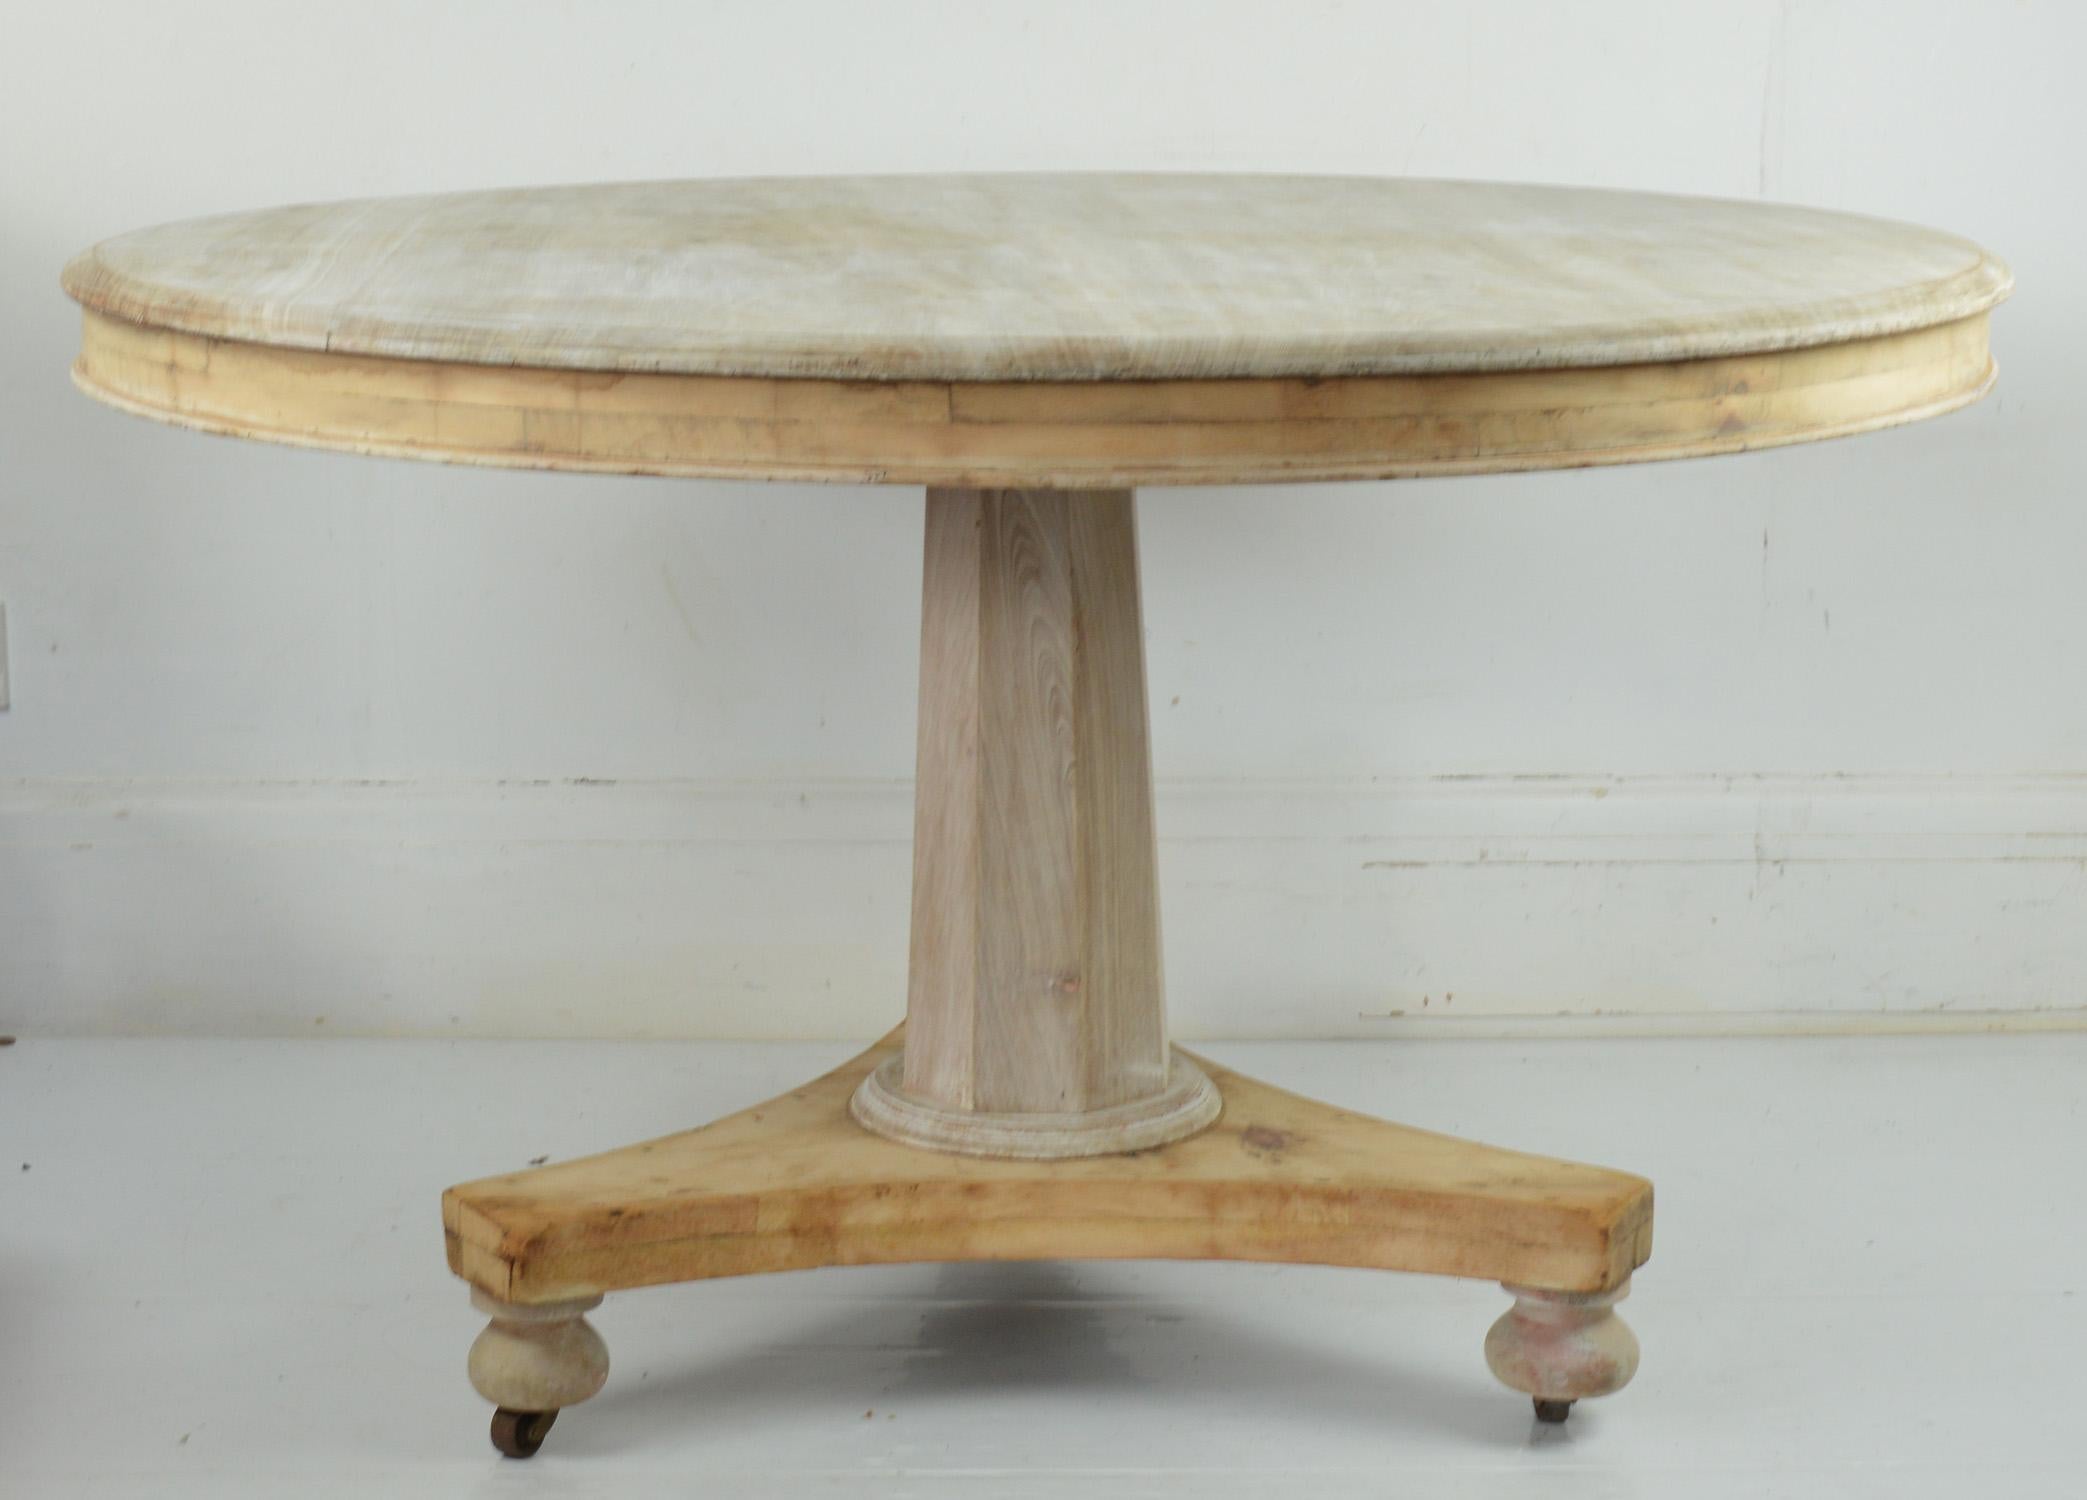 Fabulous small round table. Made from bleached Honduras mahogany and pine.

Beautifully figured top.

On the original castors. The top tips so the table can be pushed to the side of the room.

I have chosen not to lacquer or wax the